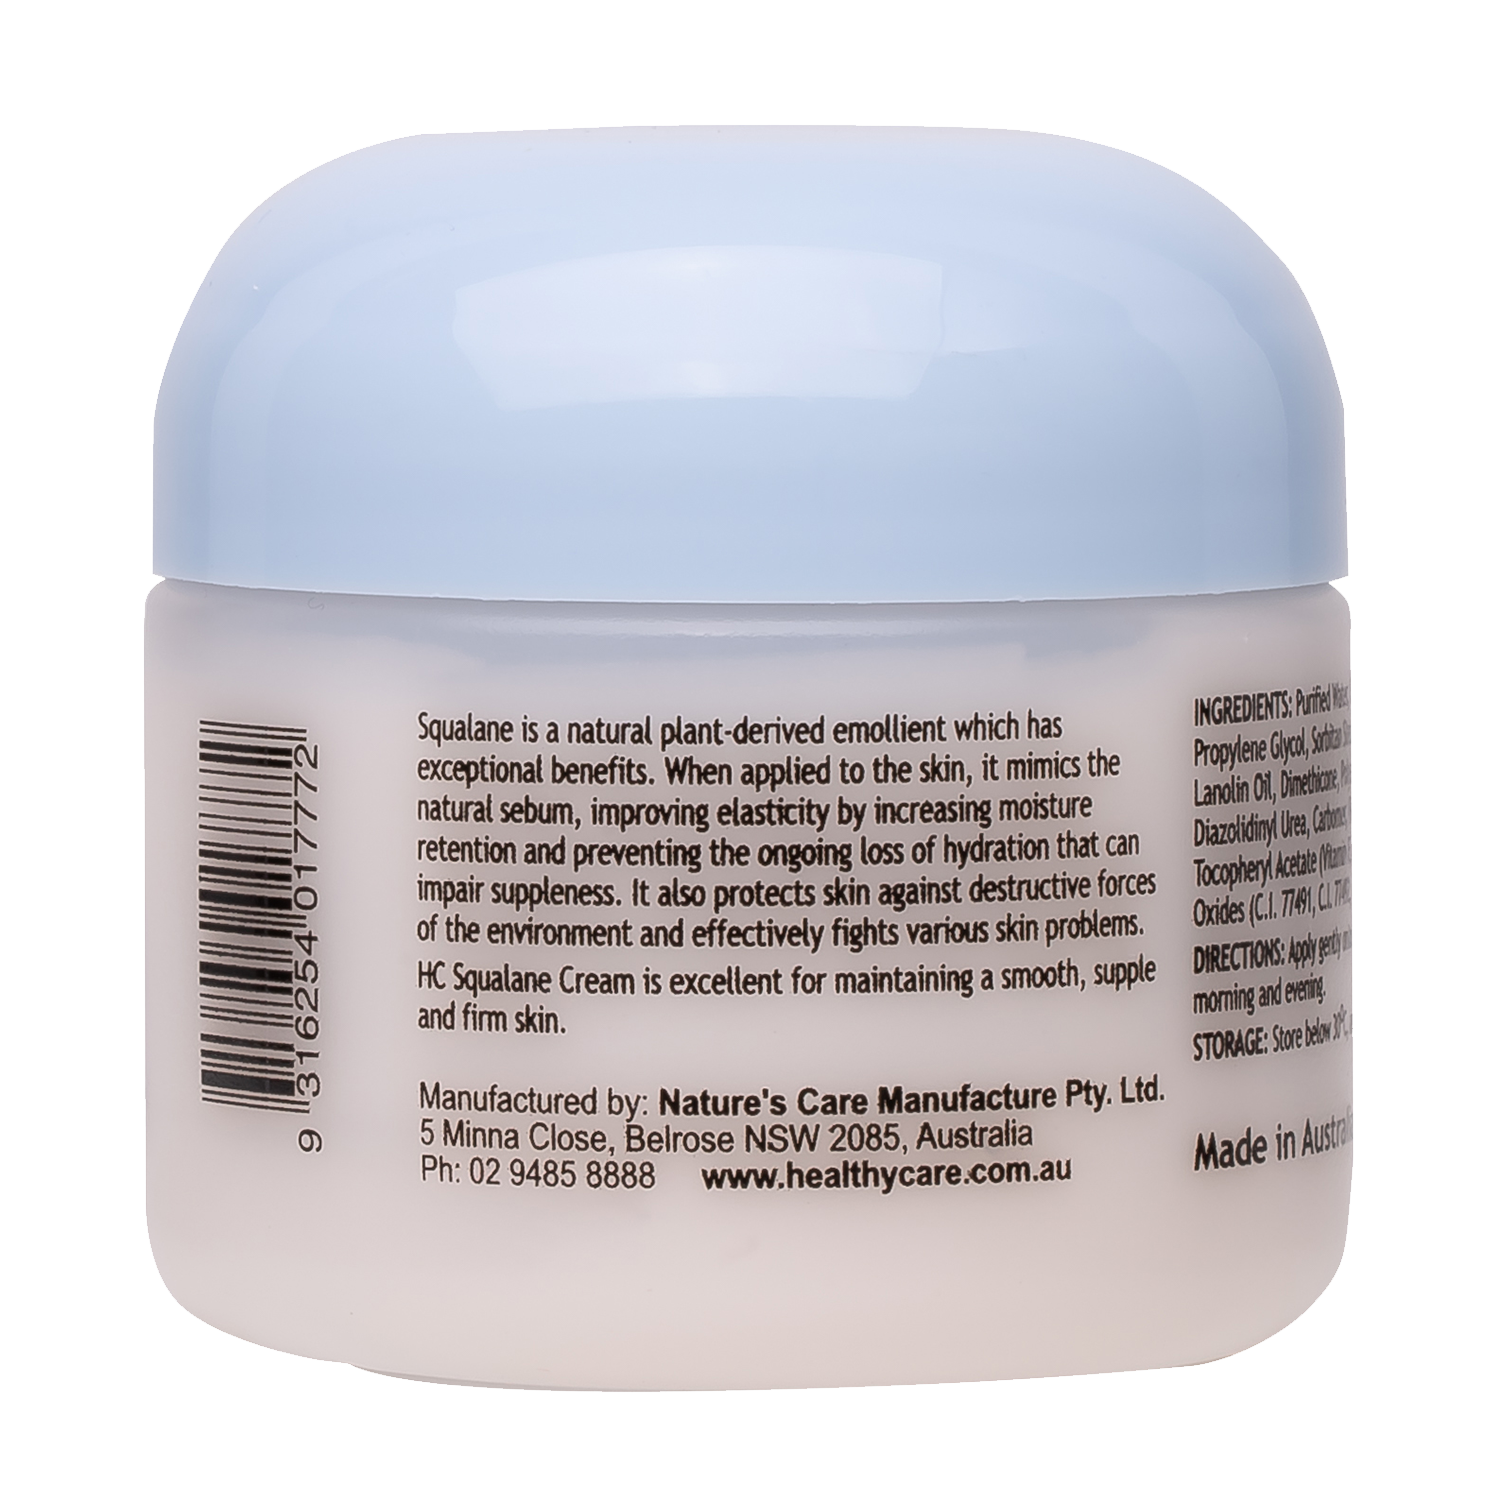 Squalane Cream 100g Tub Showing Its Benefits and Manufacturer-Healthy Care Australia